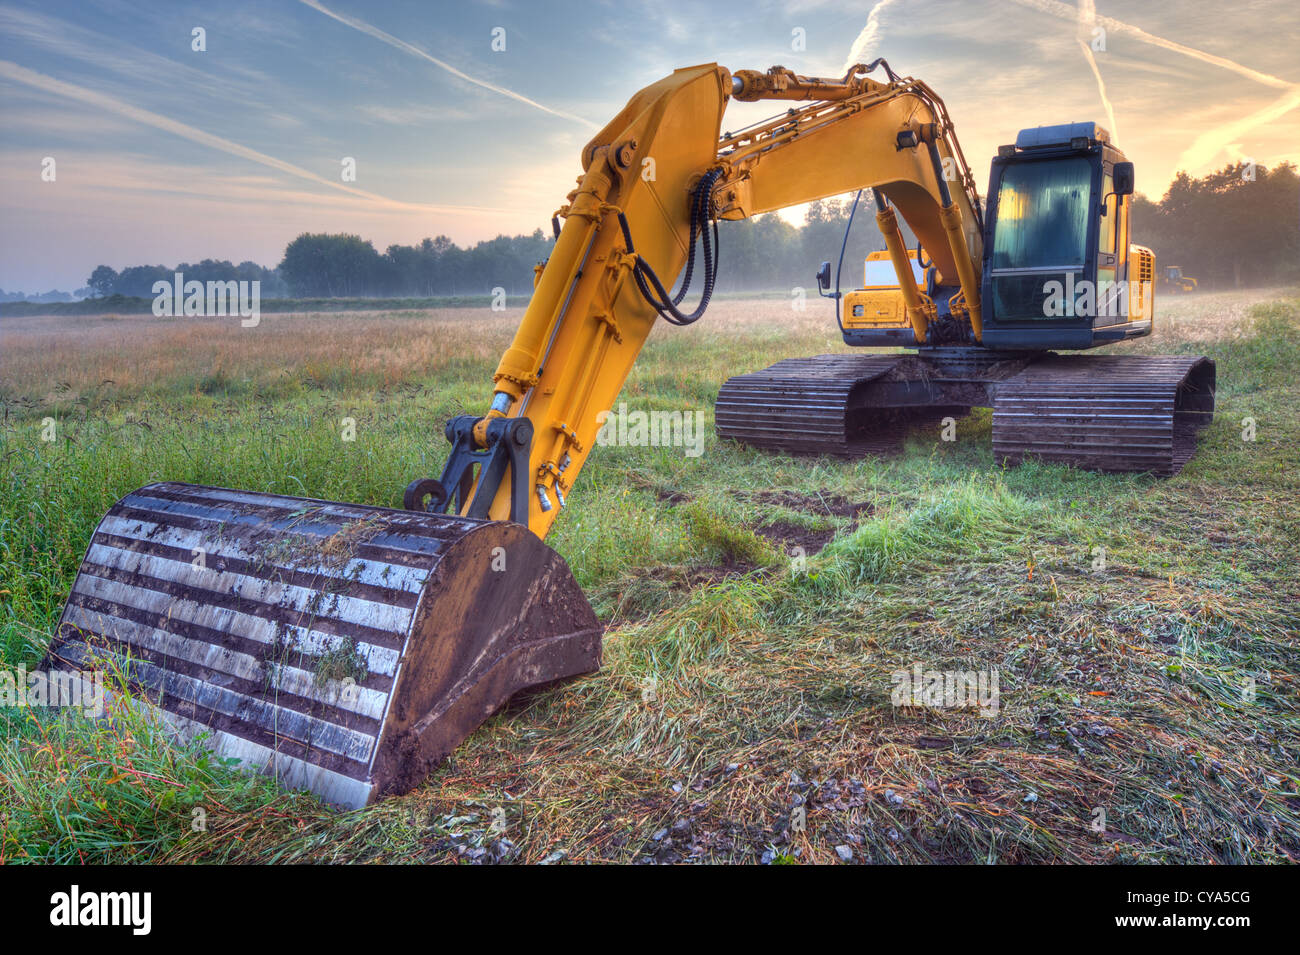 Yellow excavator in early morning light under a blue sky with condensation trails Stock Photo